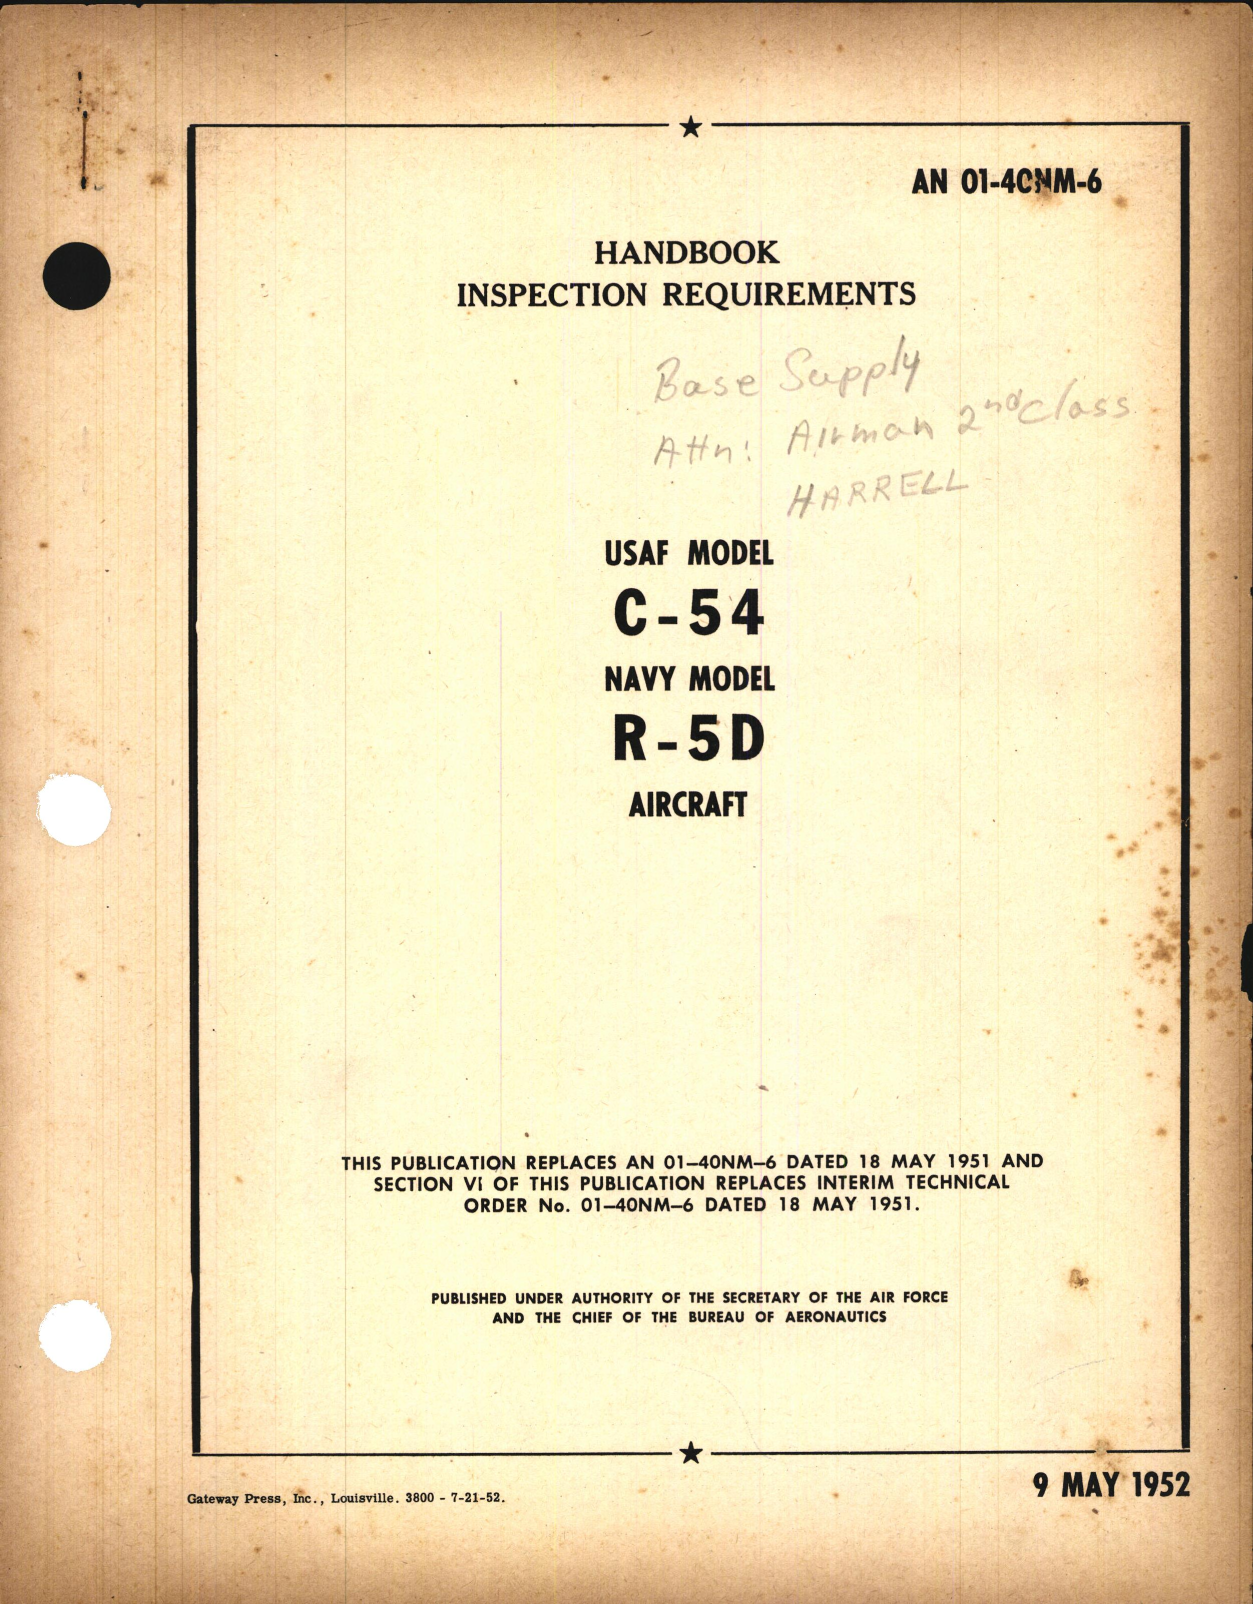 Sample page 1 from AirCorps Library document: Inspection Requirements for C-54 and R-5D Aircraft